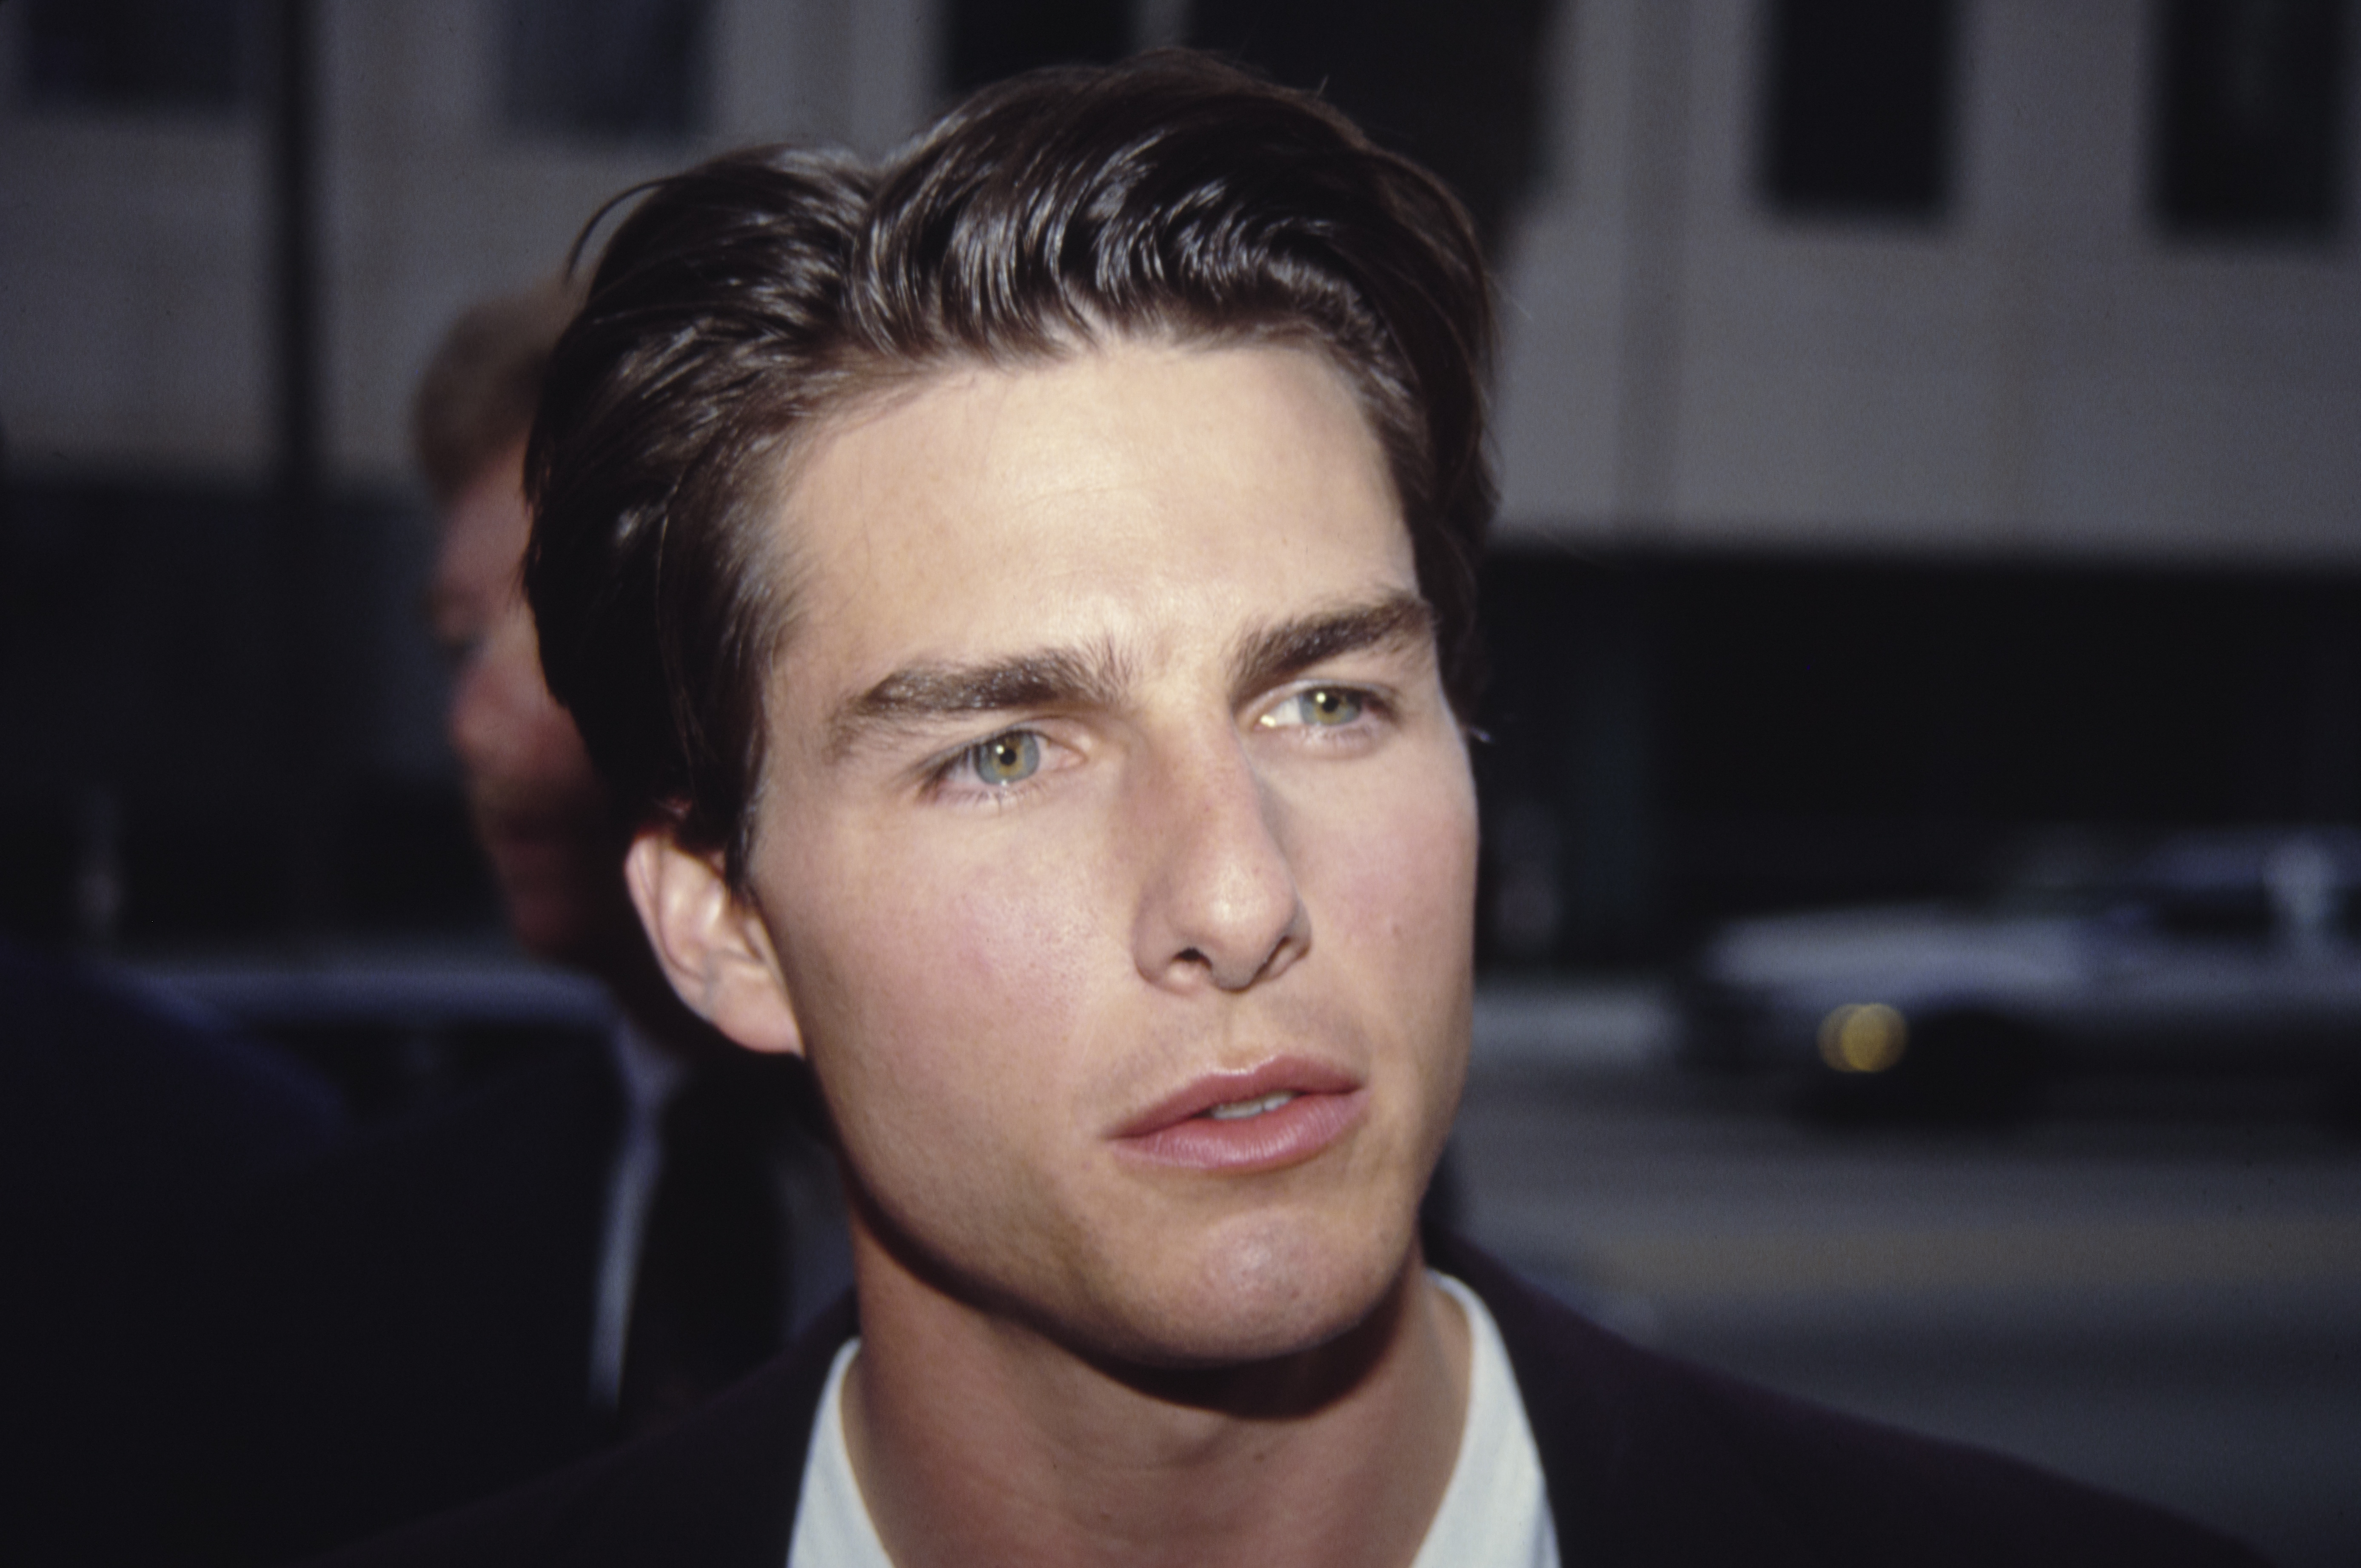 Tom Cruise attending an event in the 1980s | Source: Getty Images